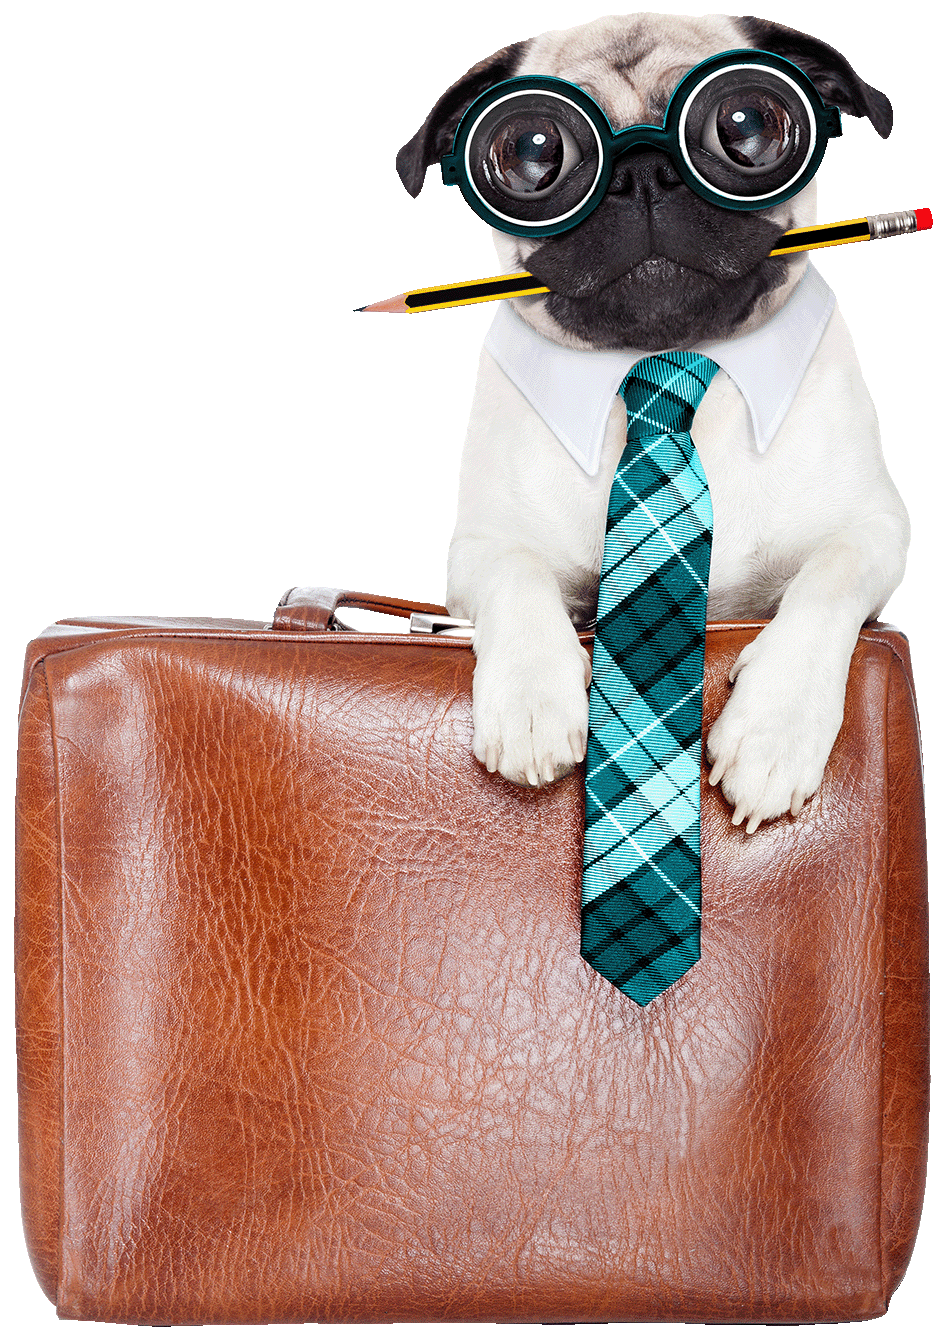 A pug wearing turquoise coke-bottle glasses, a white collar, and a plaid turquoise necktie holds a pencil in its mouth. The dog rests on a brown leather briefcase.